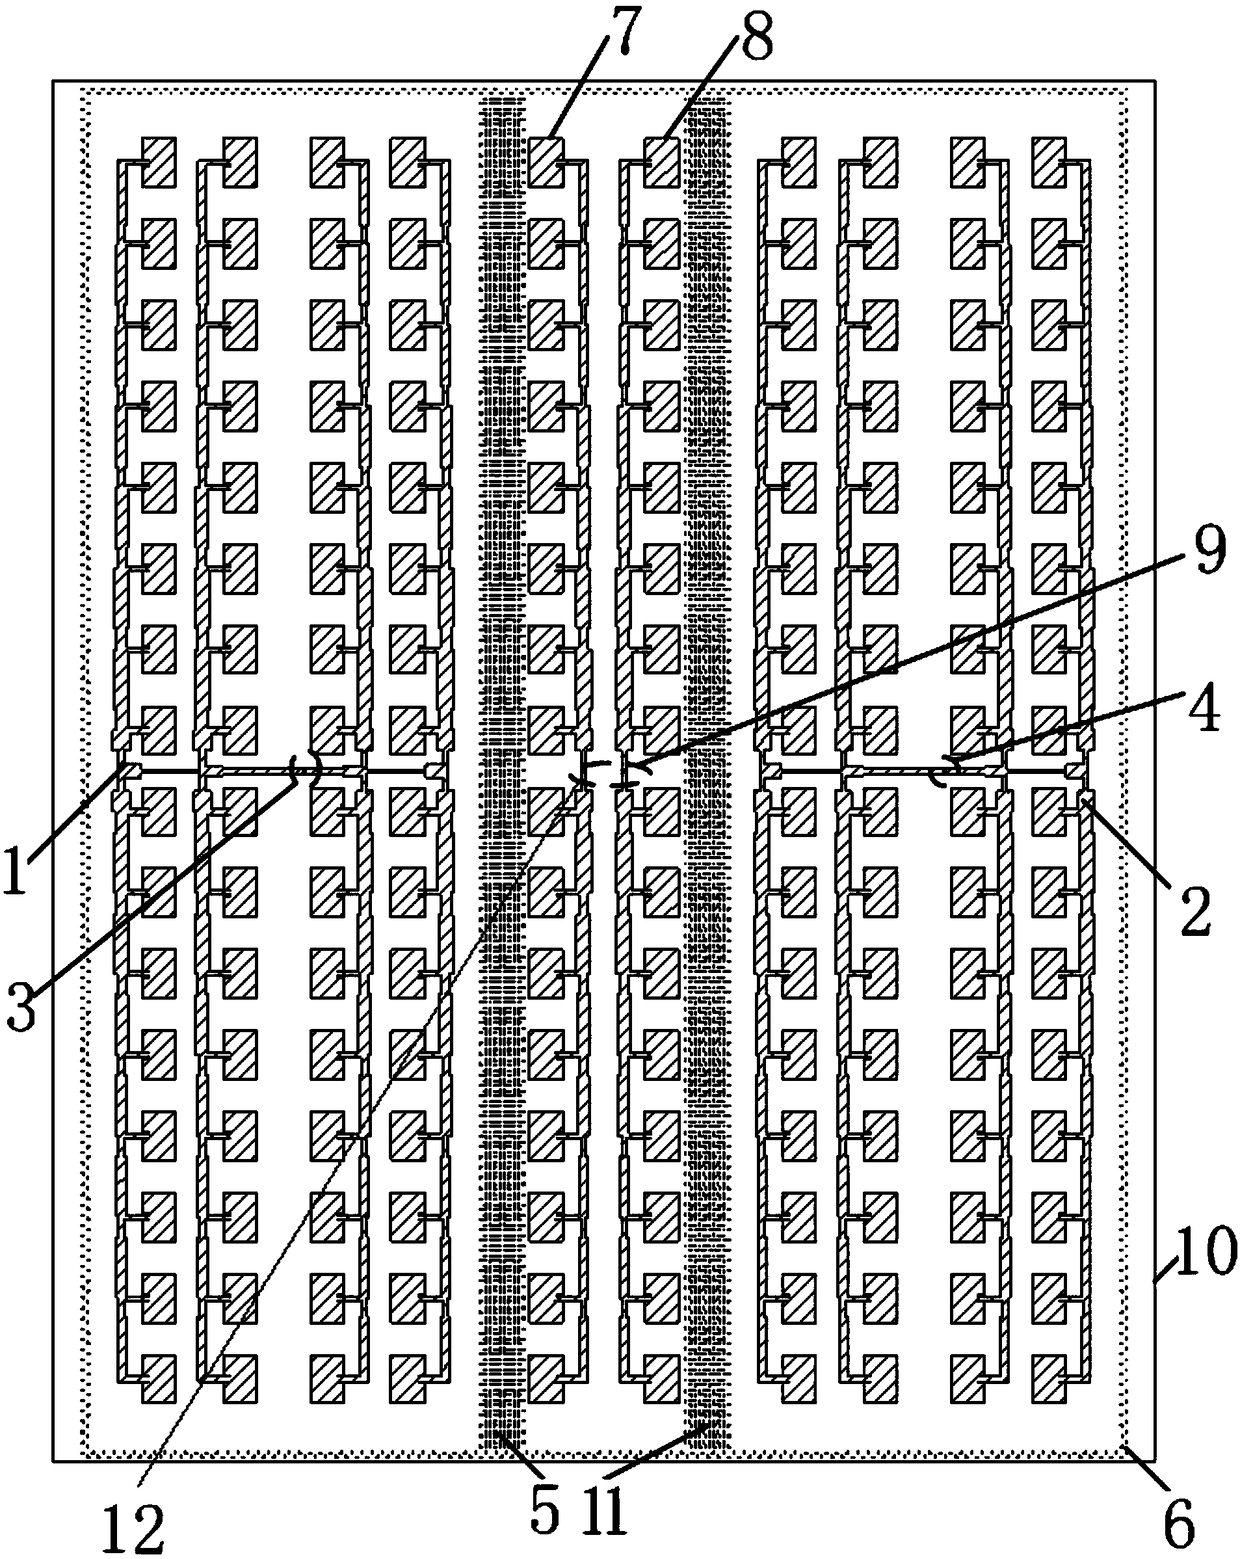 Microstrip array antenna structure capable of improving isolation between antennas